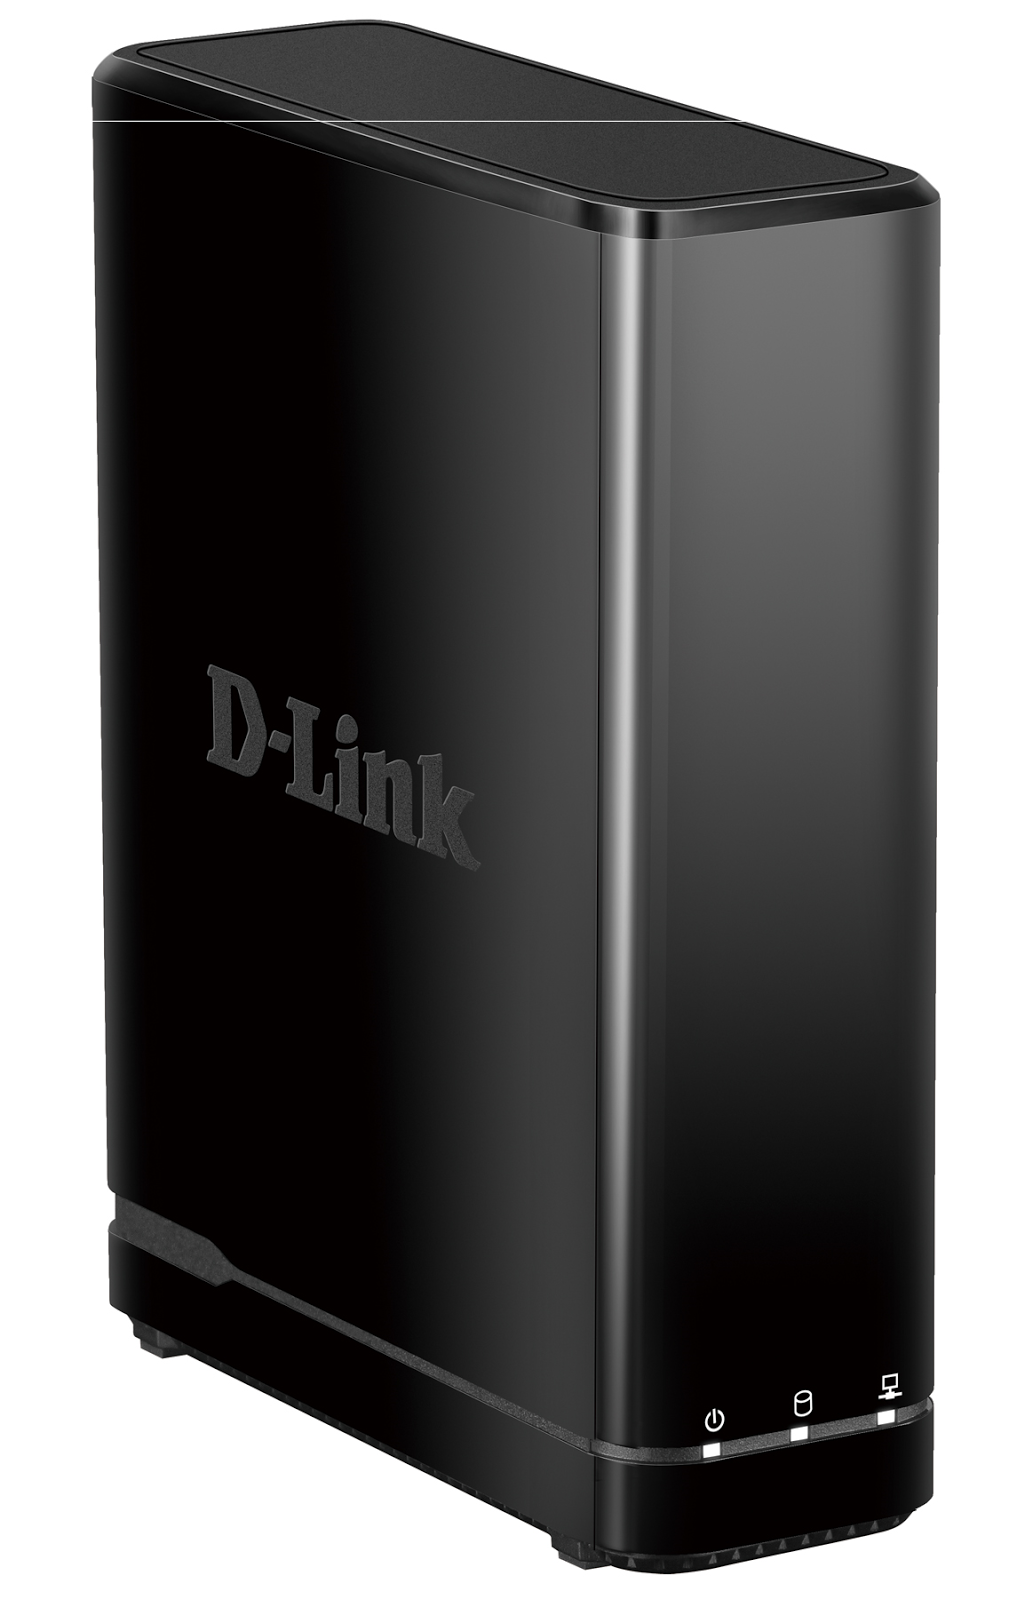 D-Link unveils DNR-312L mydlink Network Video Recorder for Small Business Owners